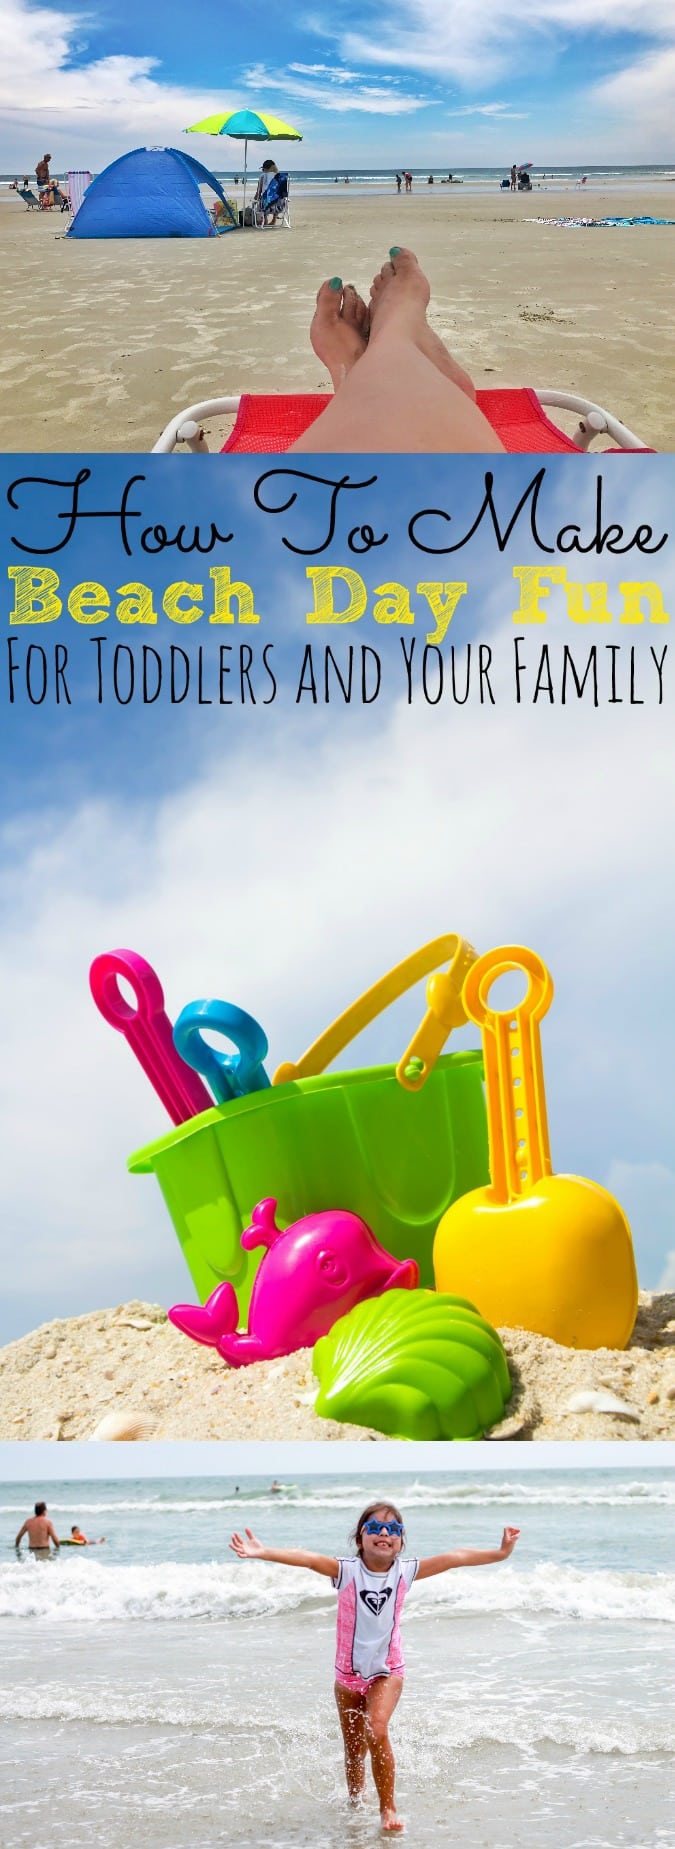 How To Make Beach Day Fun For Toddlers And Your Family